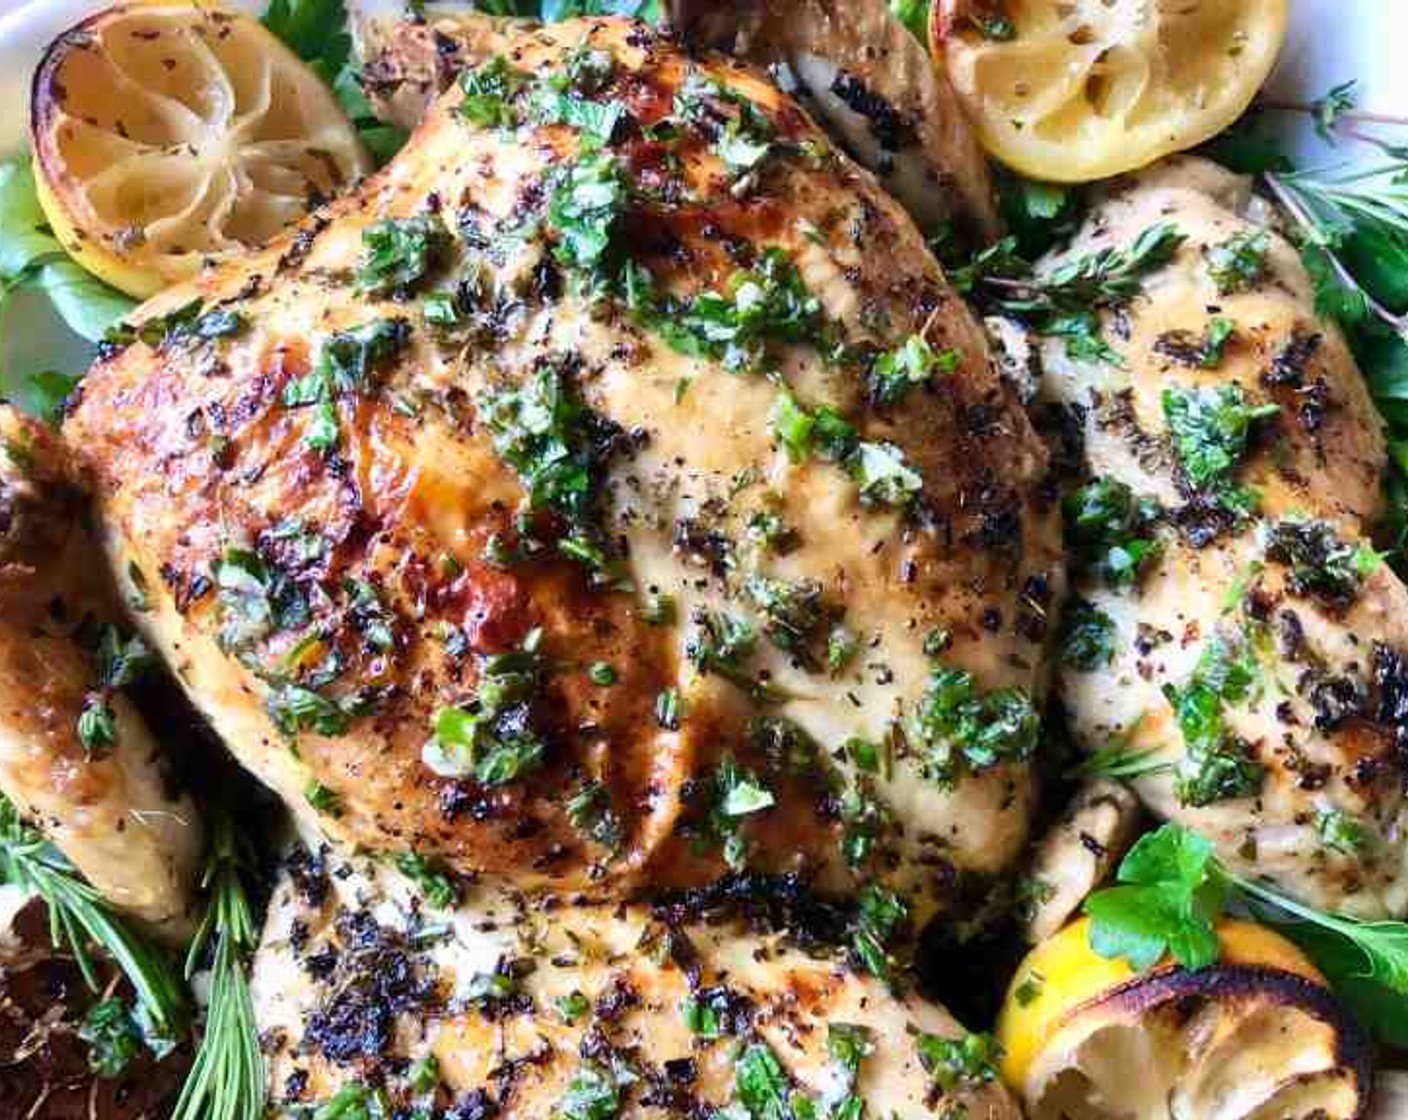 Spatchcock Chicken with Lemon and Herbs